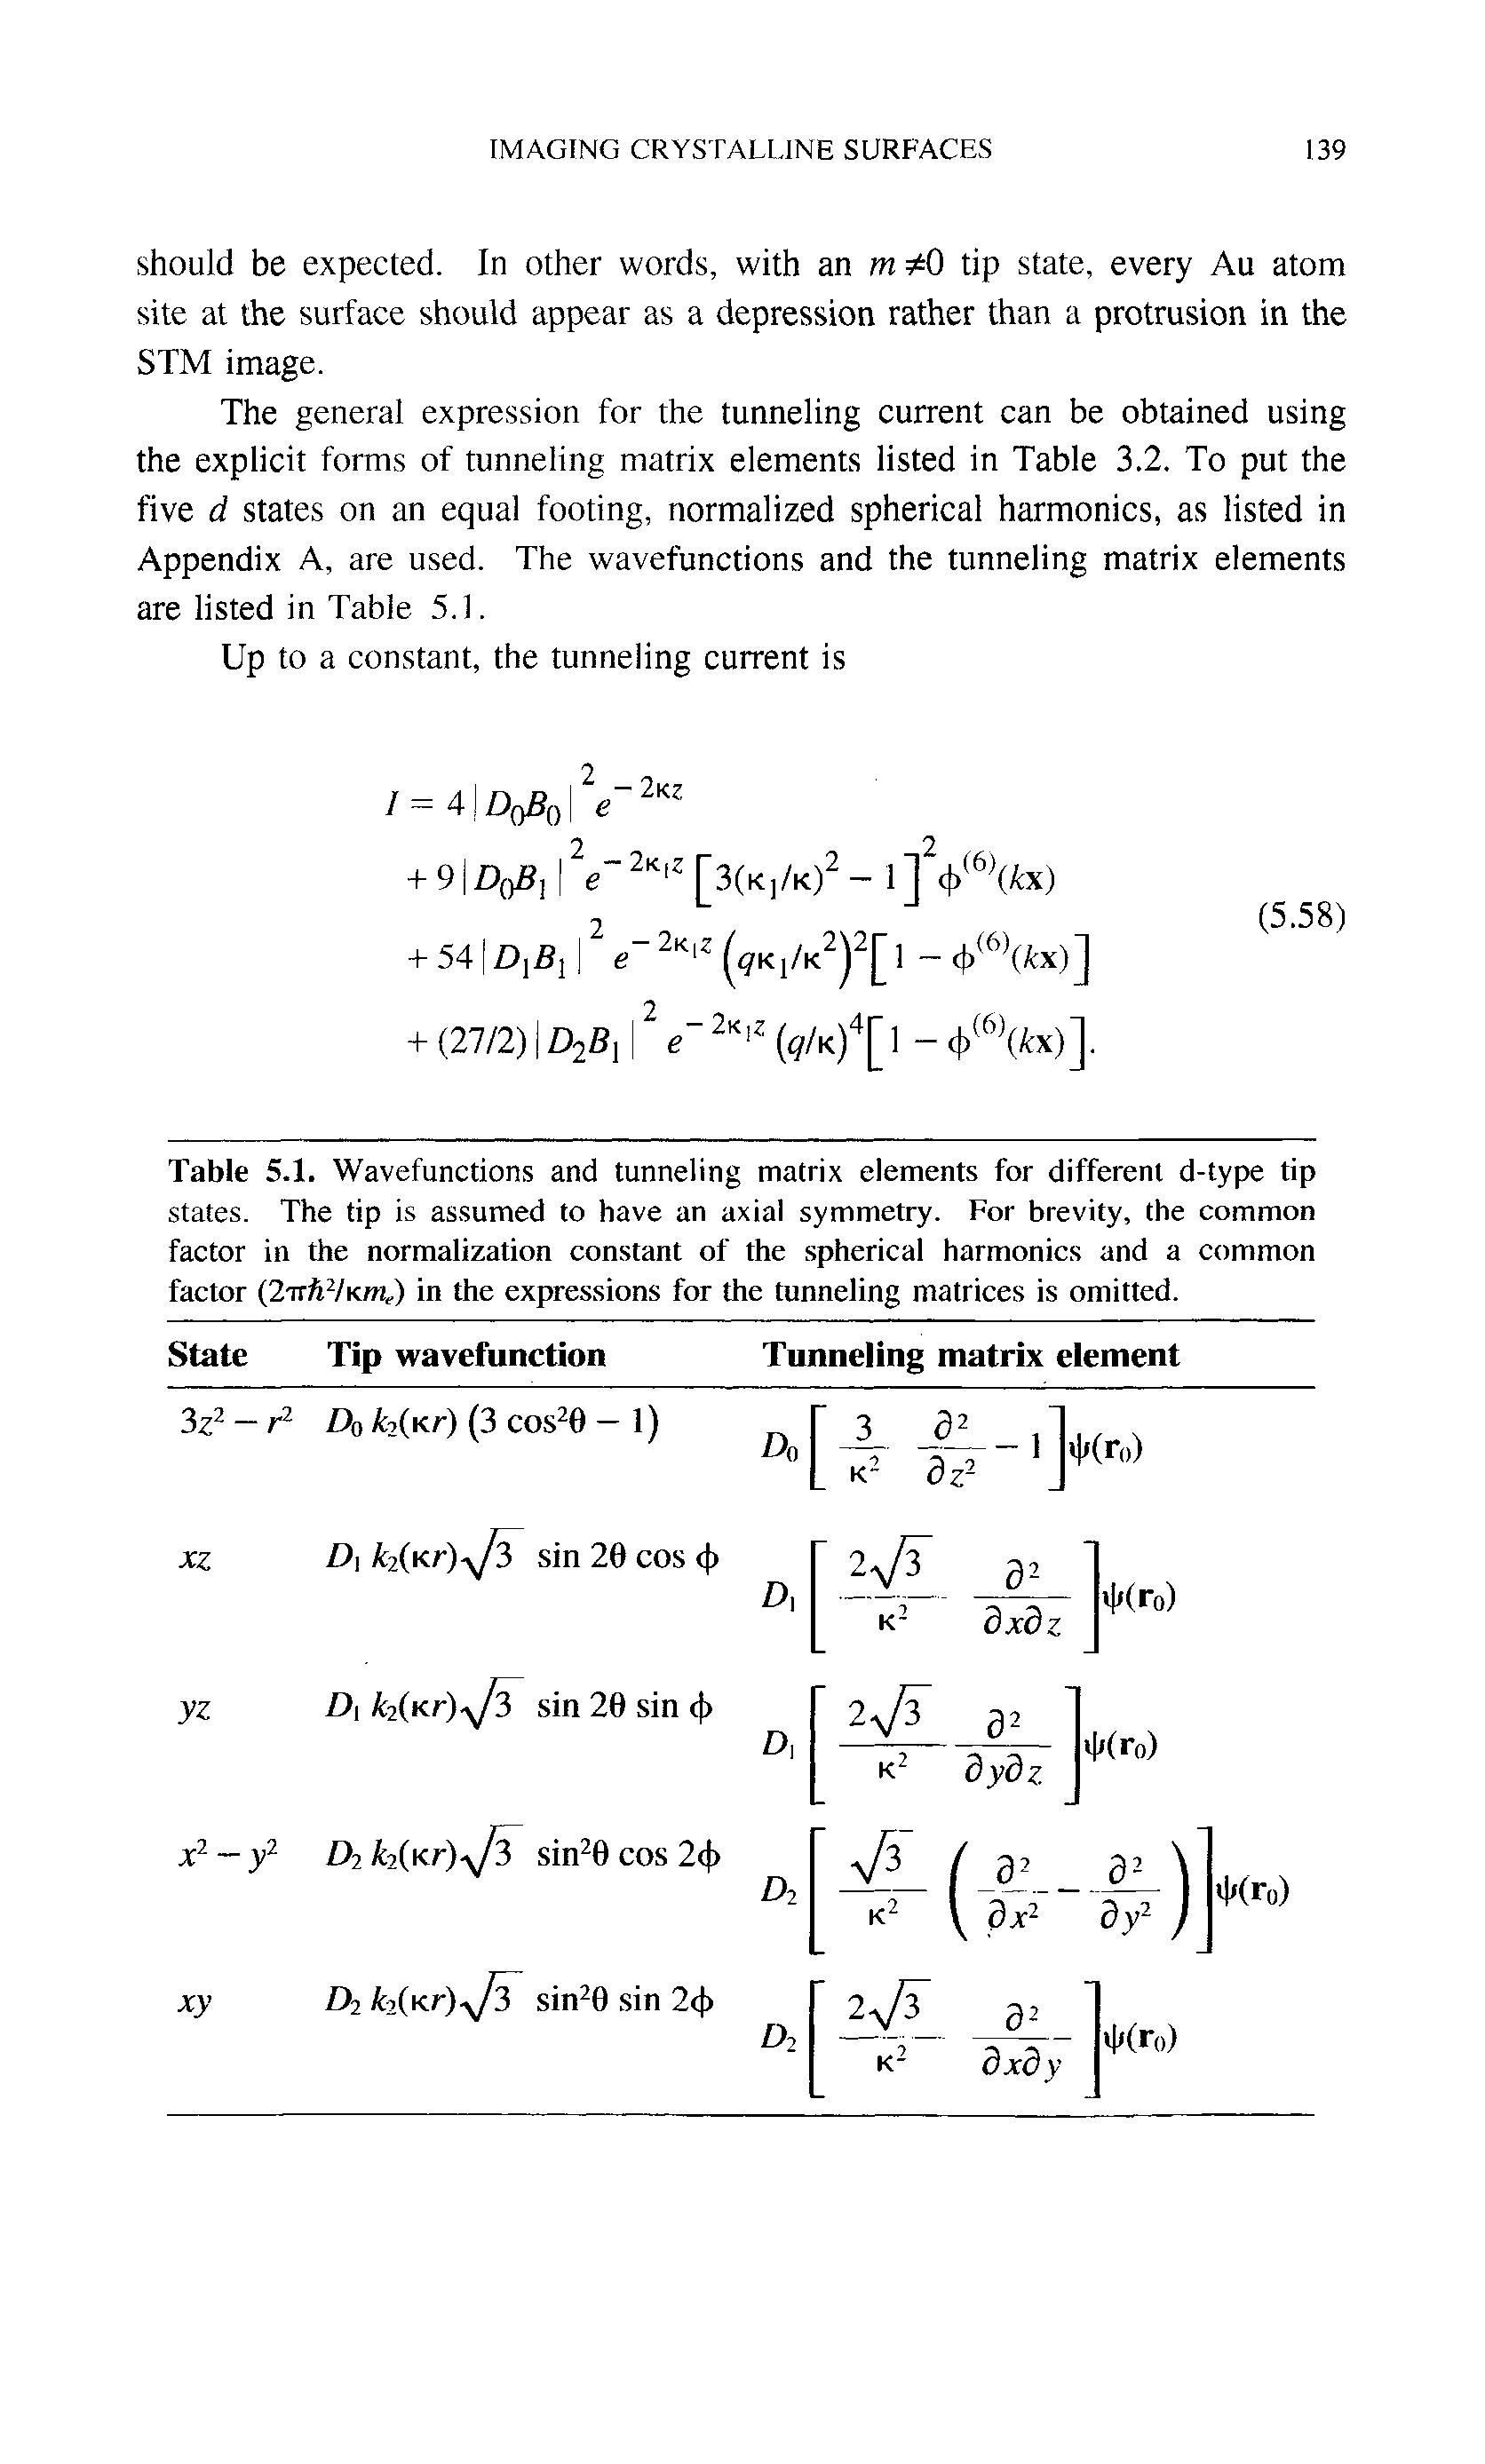 Table 5.1. Wavefunctions and tunneling matrix elements for different d-type tip states. The tip is assumed to have an axial symmetry. For brevity, the common factor in the normalization constant of the spherical harmonics and a common factor (2TT VKm,) in the expressions for the tunneling matrices is omitted.